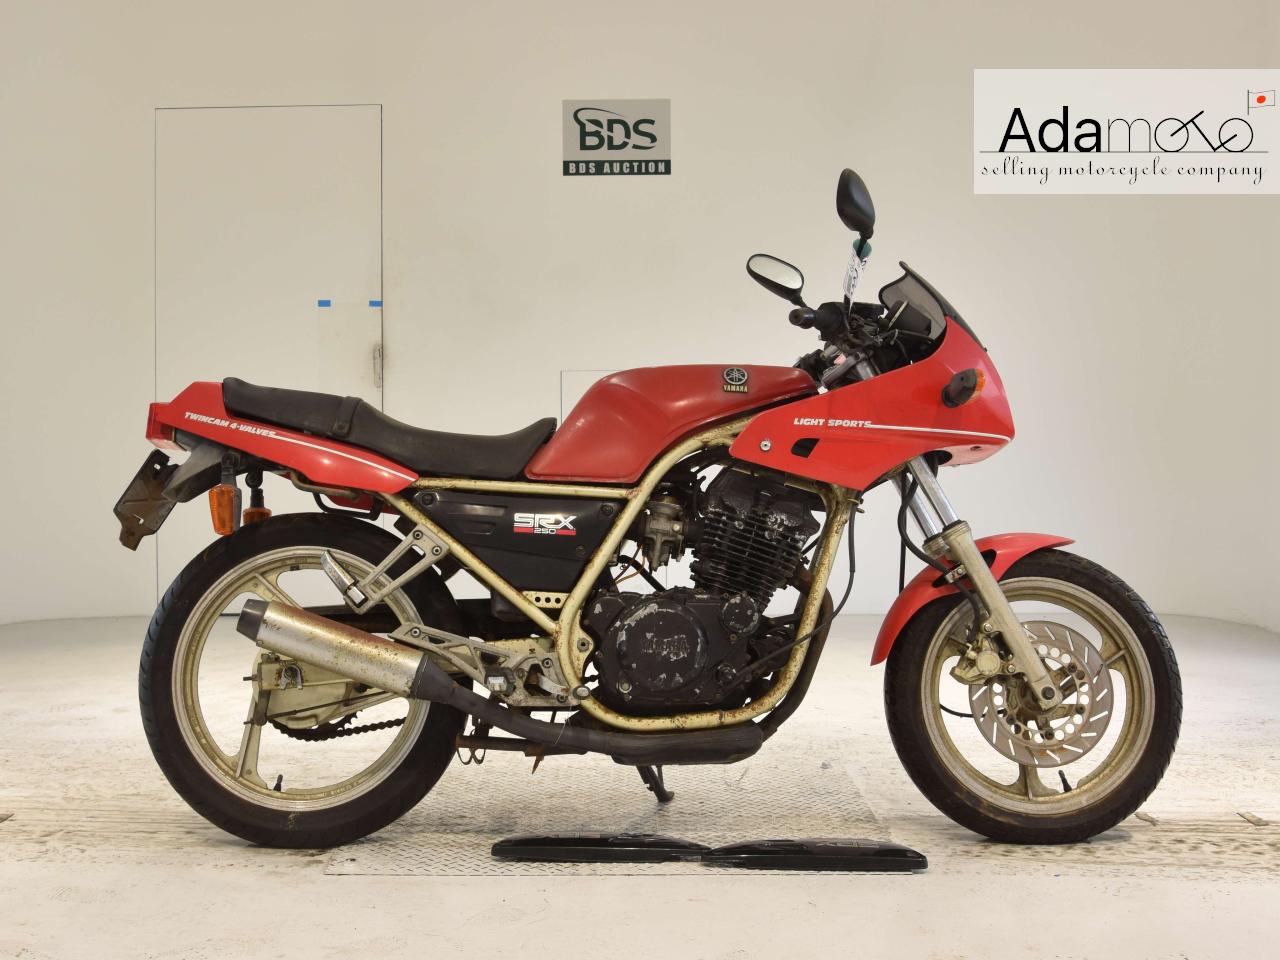 Yamaha SRX250-1 (without a hood) - Adamoto - Motorcycles from Japan